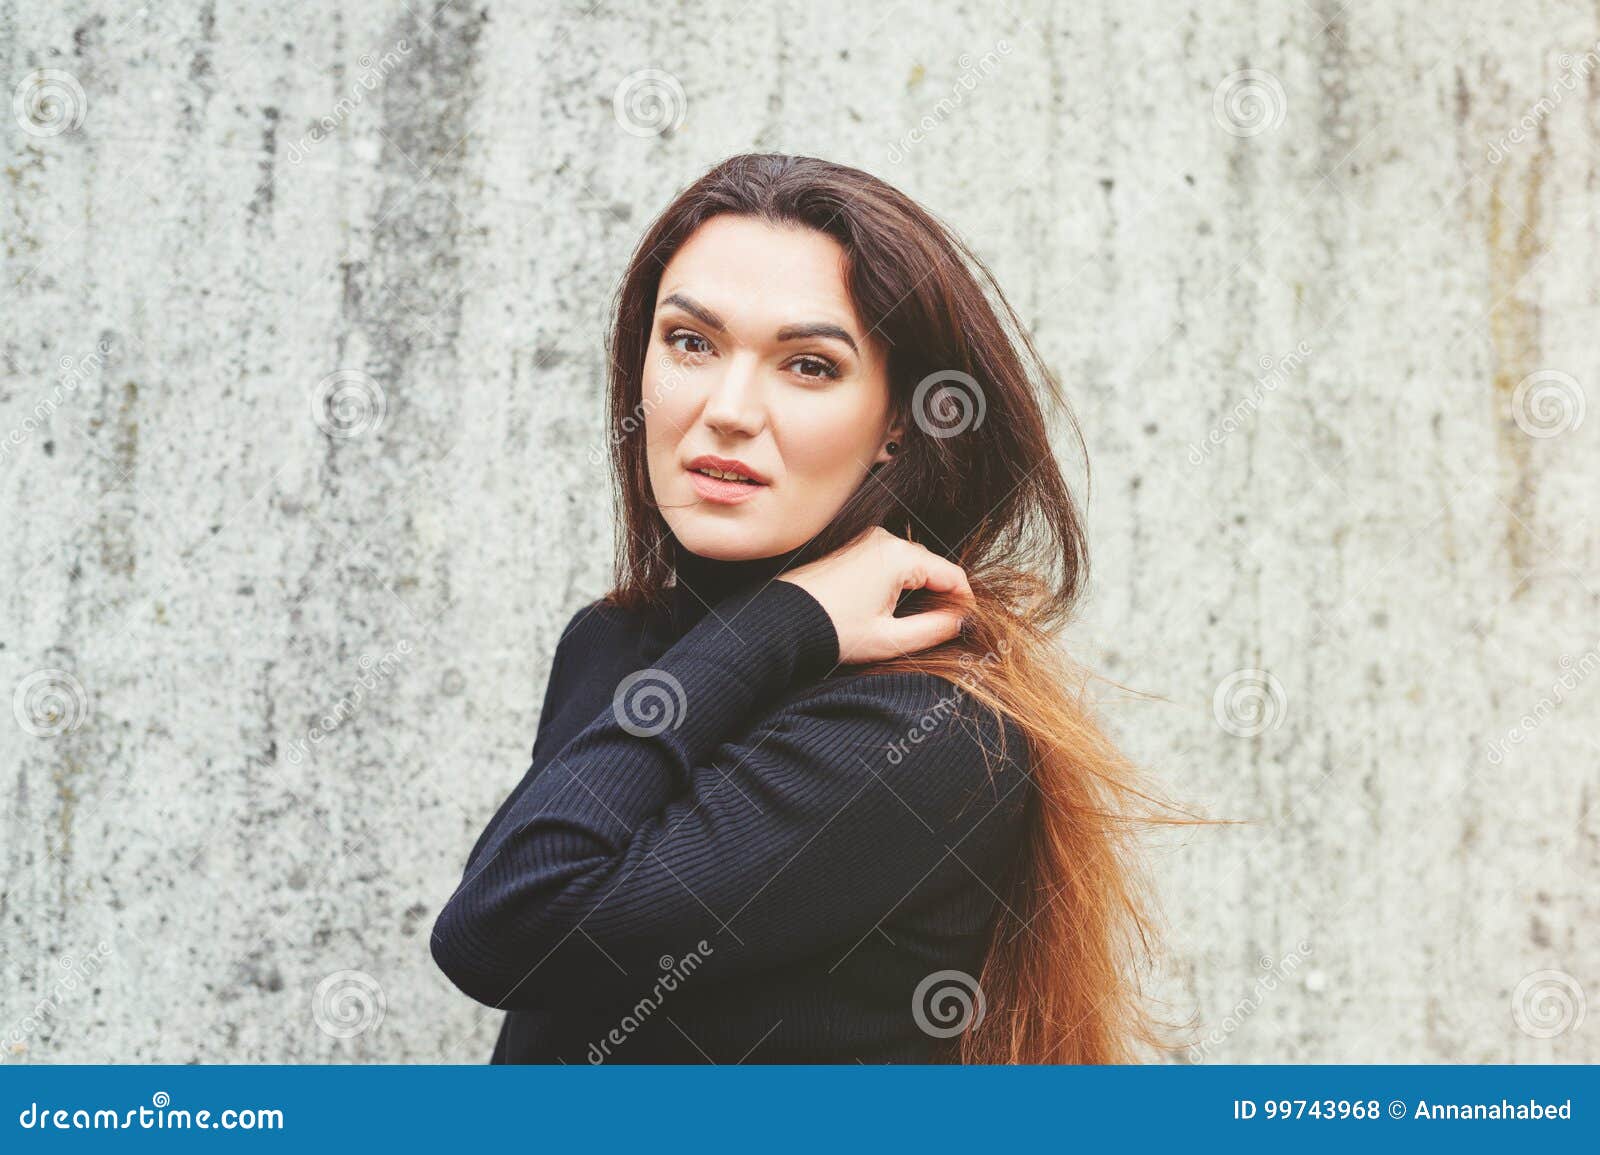 776,100+ 35 Year Old Woman Stock Photos, Pictures & Royalty-Free